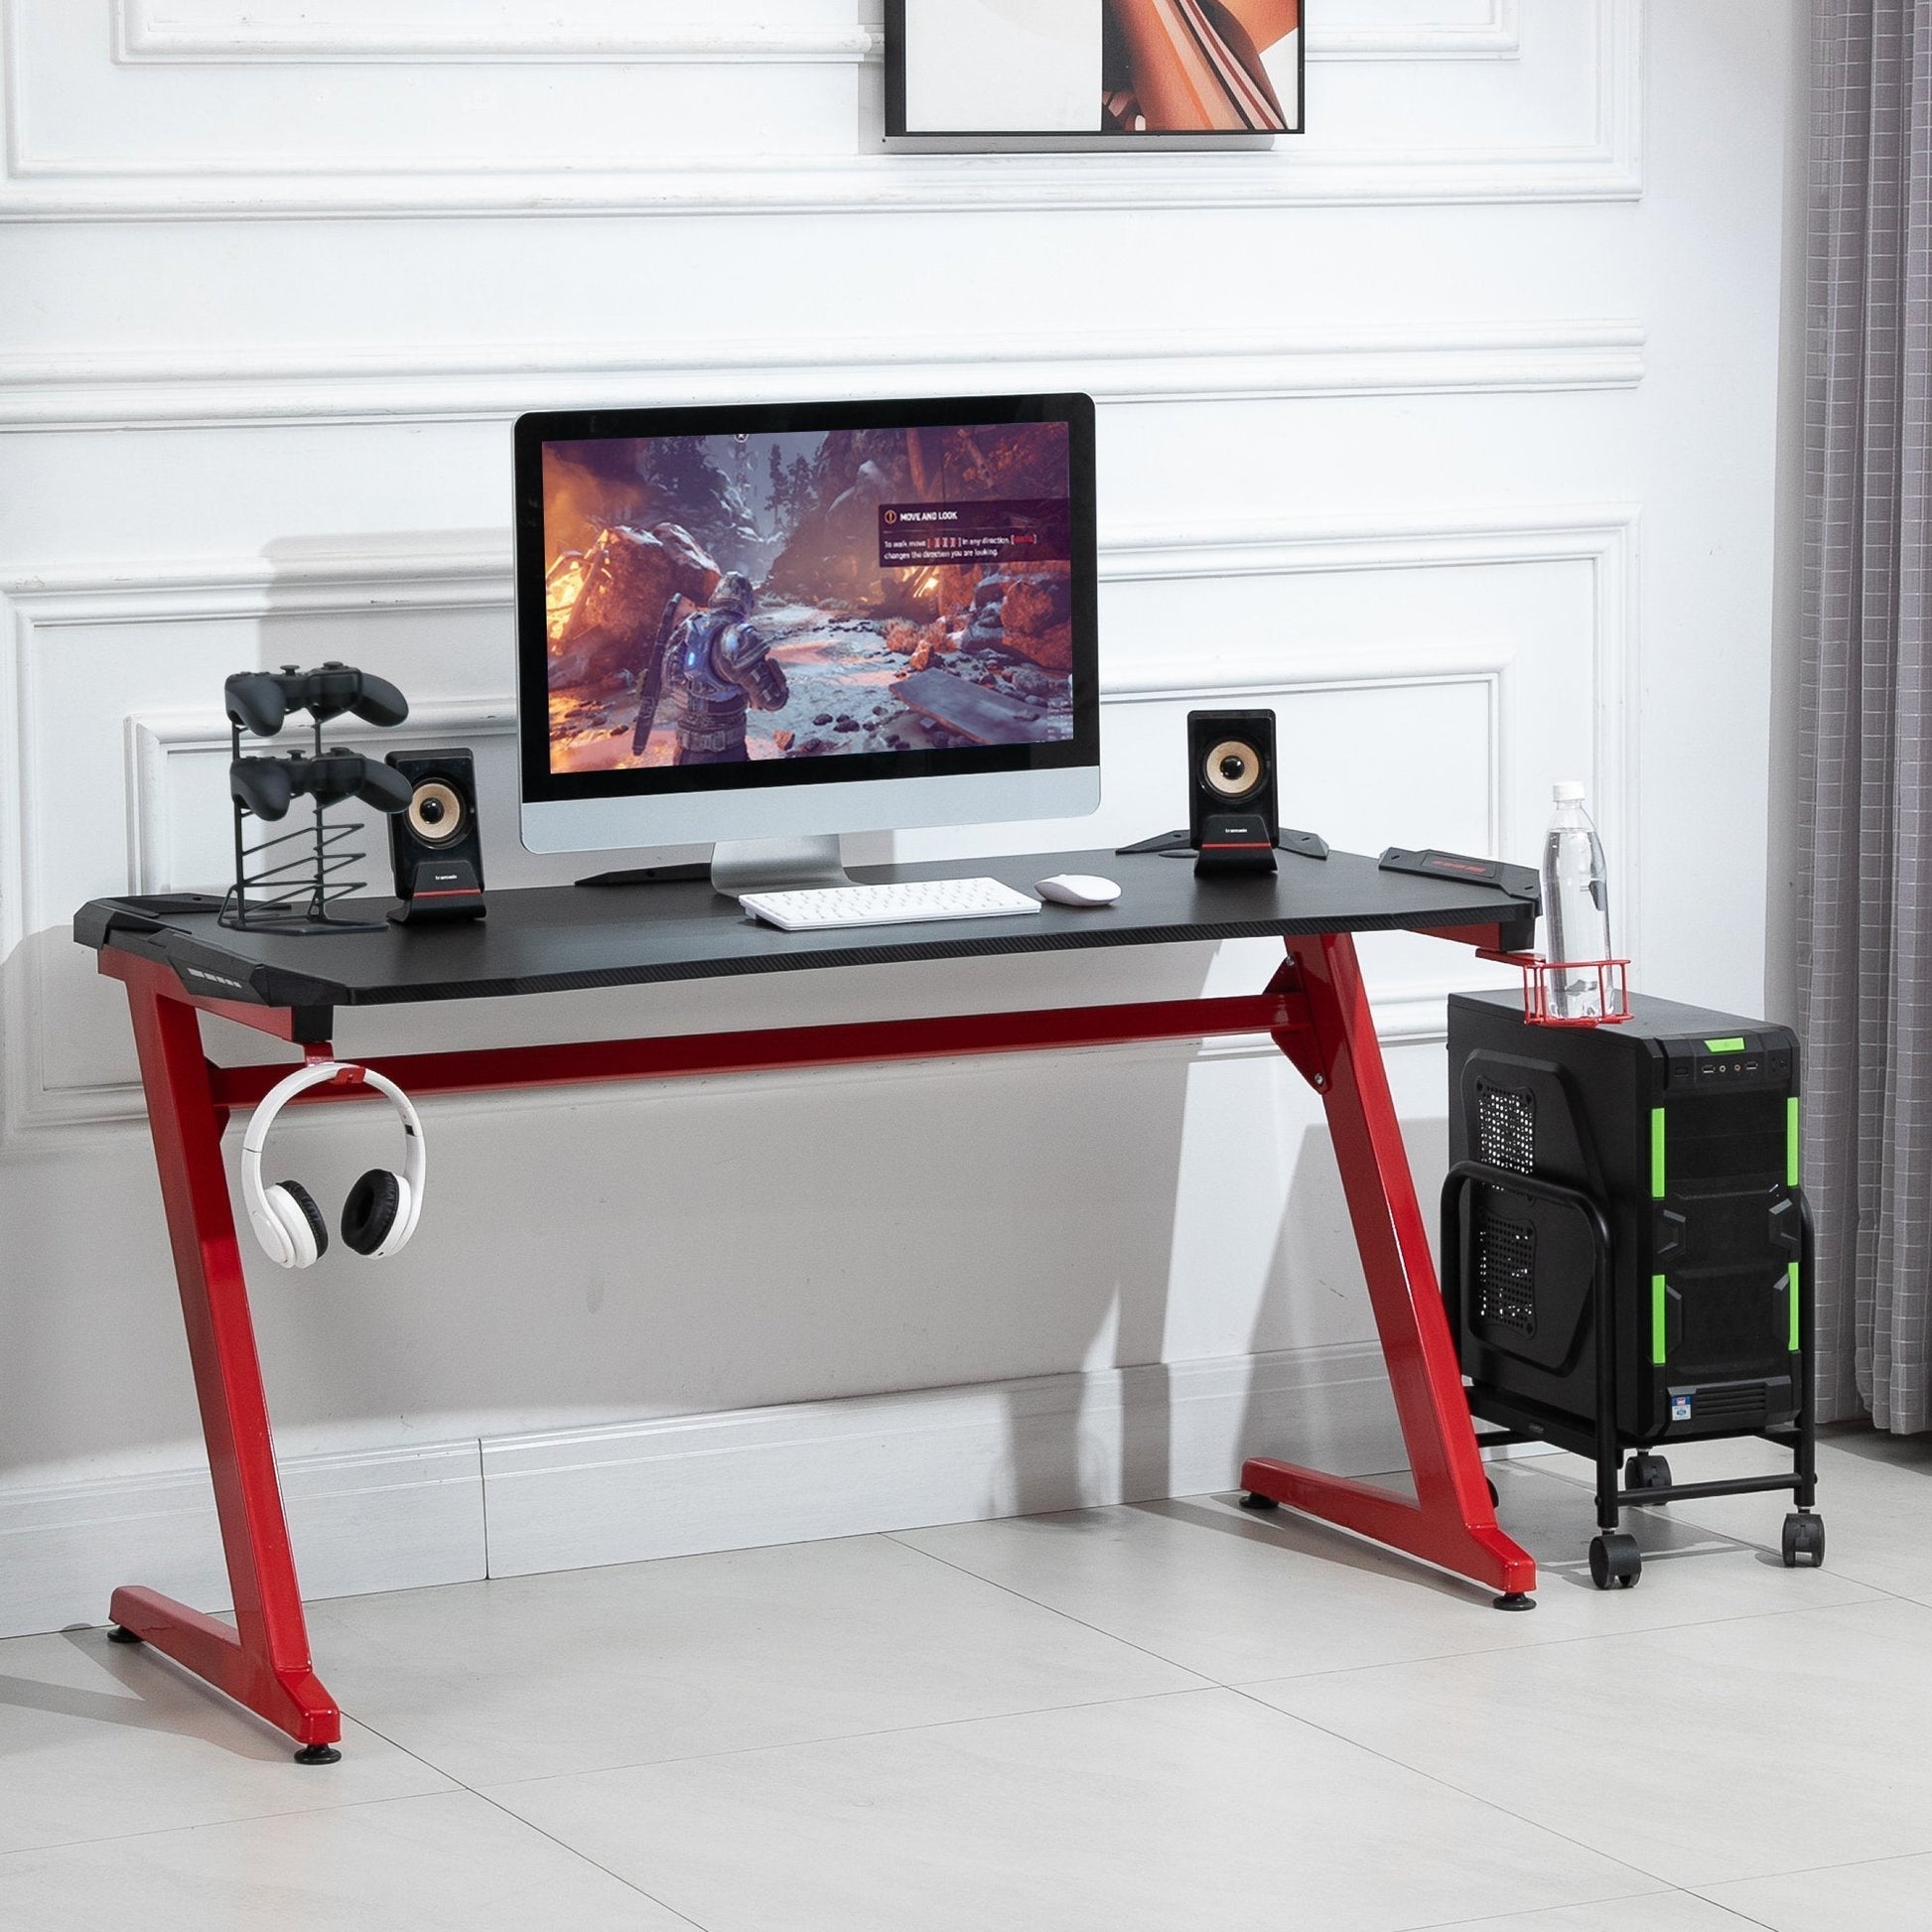 Maplin Plus Large Computer Gaming Desk with Cup Holder & Headphone Hook - Red/Black - maplin.co.uk